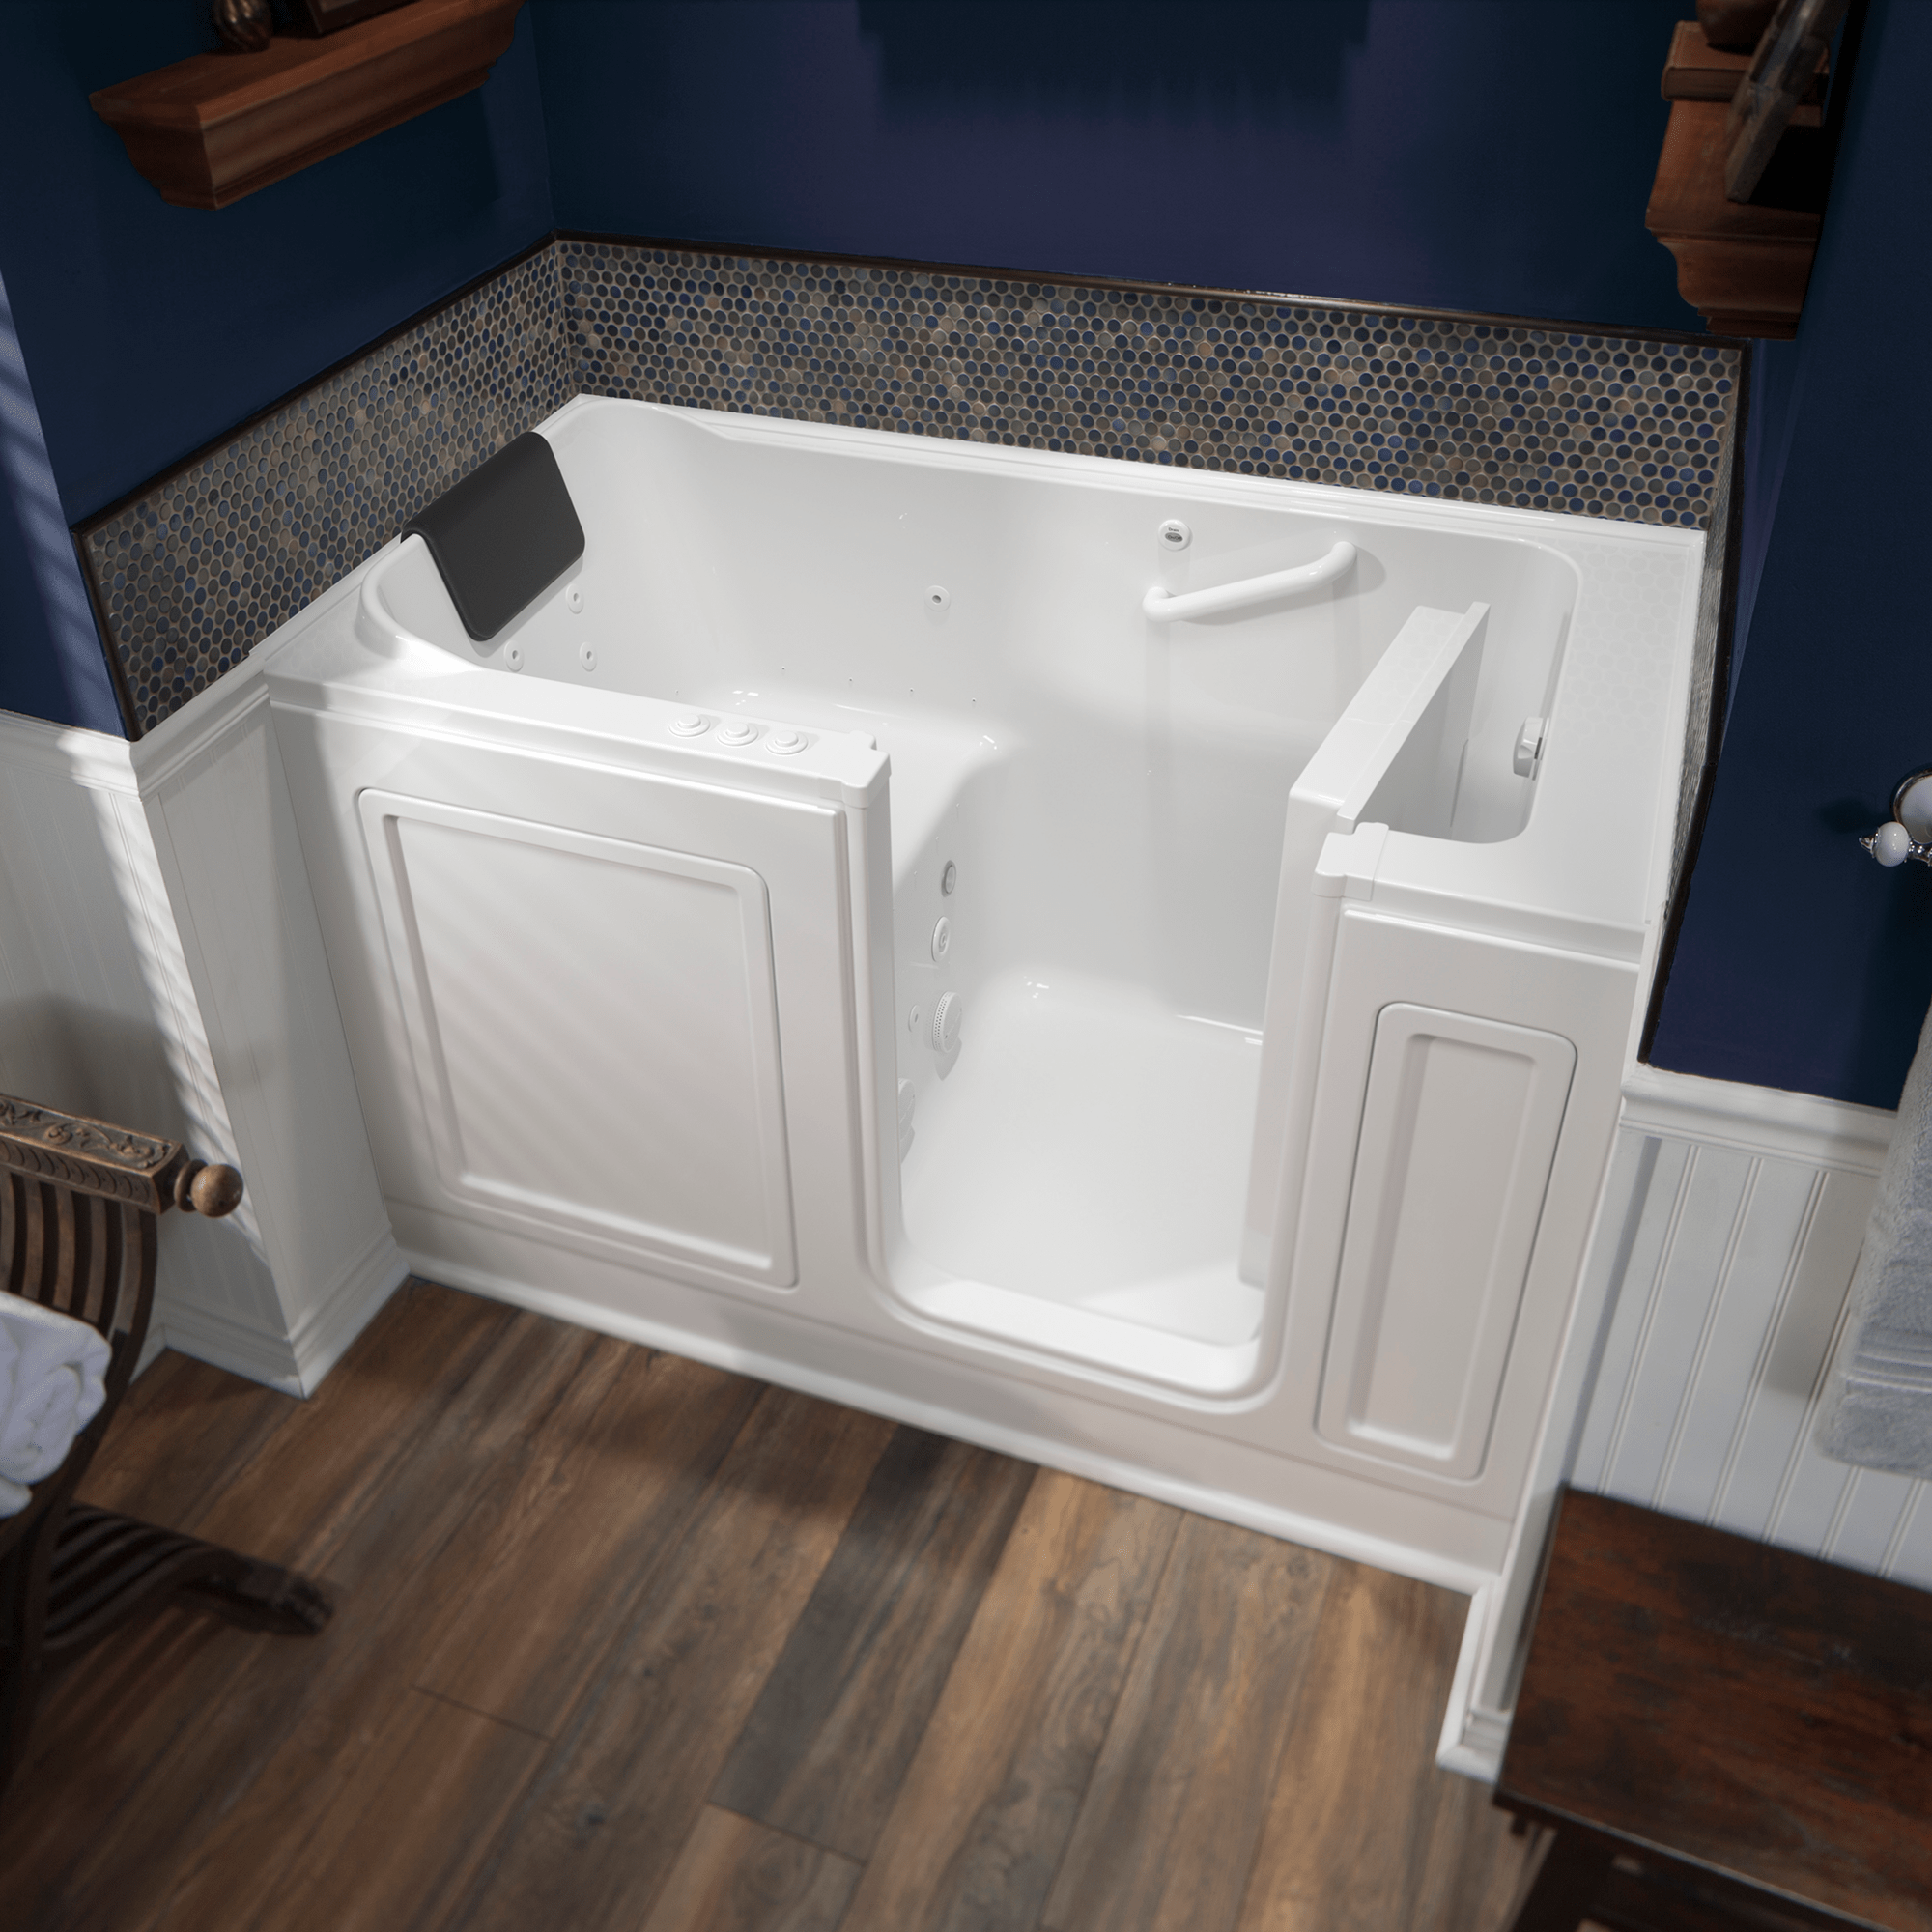 Acrylic Luxury Series 32 x 60  Inch Walk in Tub With Combination Air Spa and Whirlpool Systems   Right Hand Drain WIB WHITE